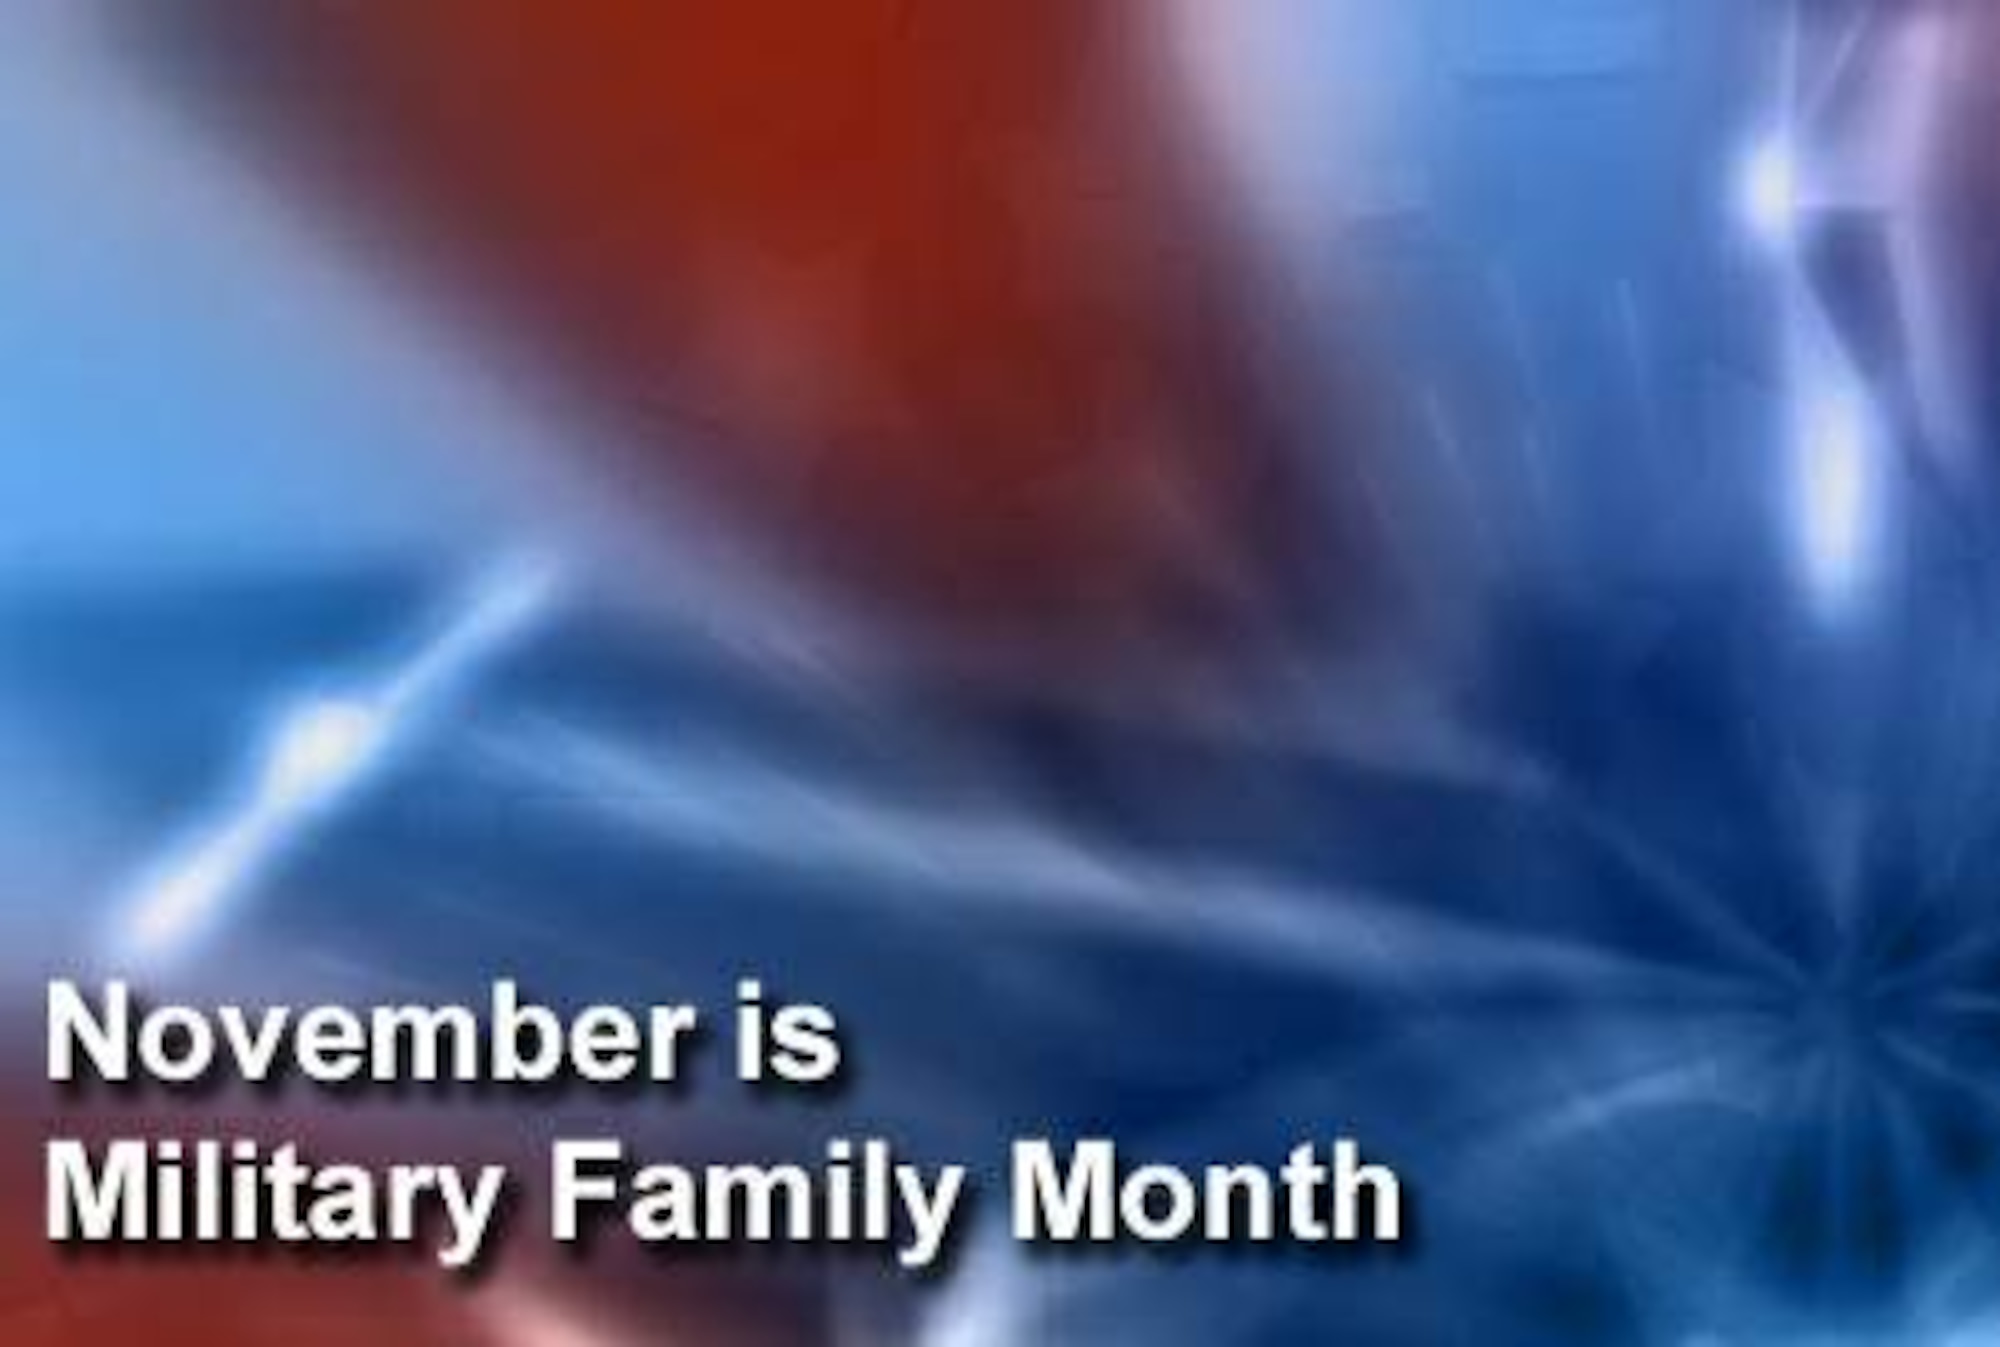 President Barack Obama pledged his support of military members and their families and said Americans have a "solemn obligation" to preserve their well-being in his proclamation declaring November as Military Family Month. (U.S. Air Force graphic)